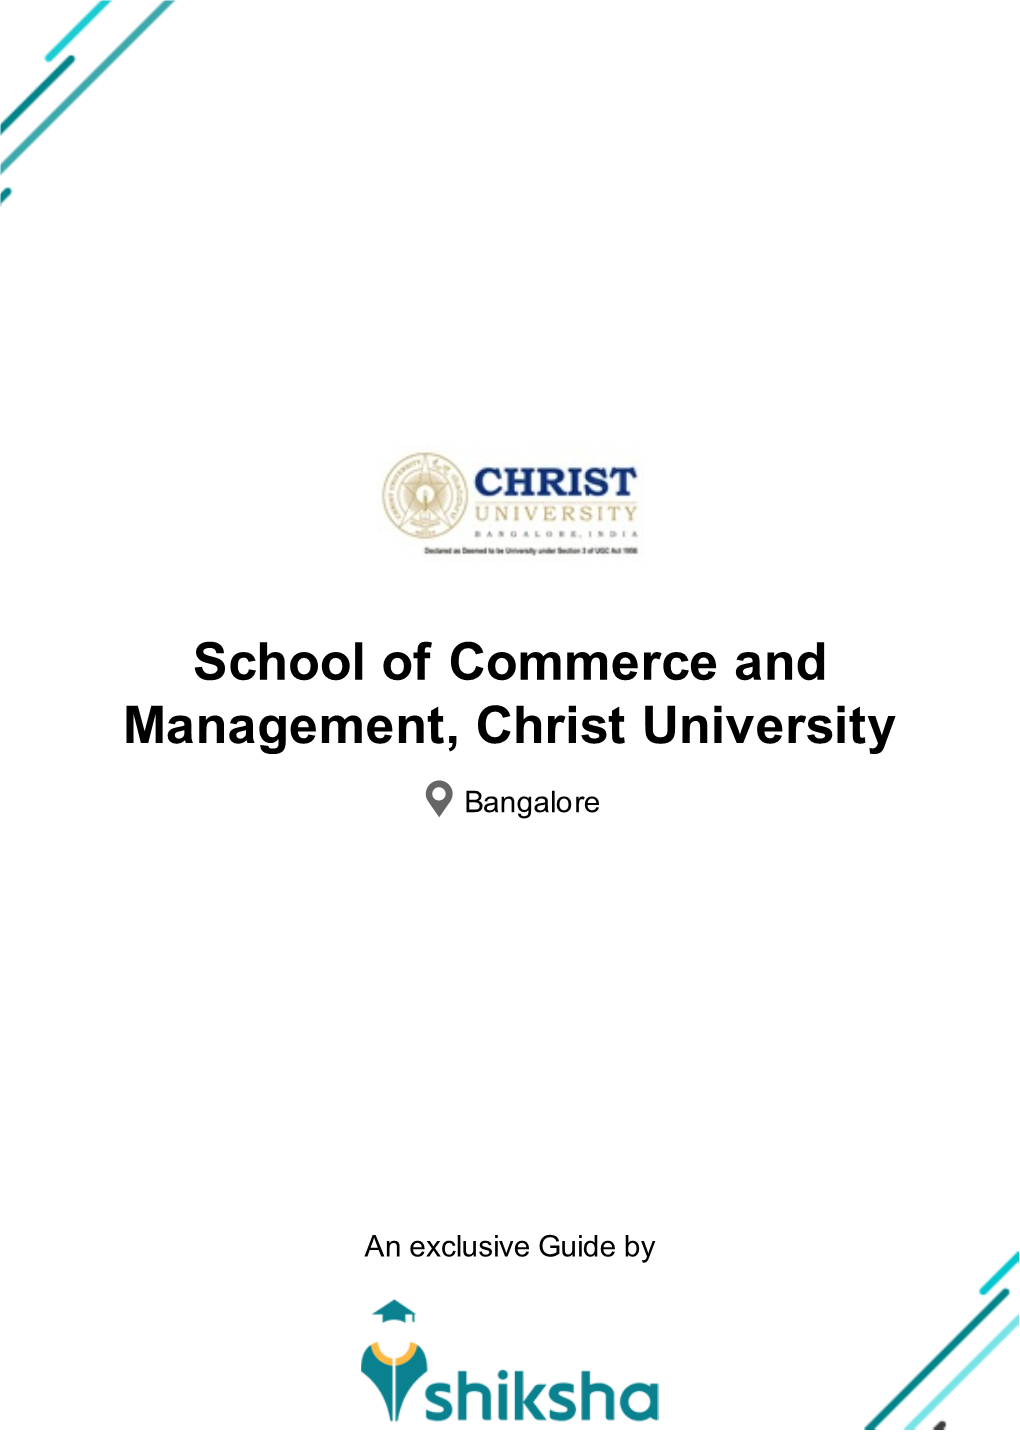 School of Commerce and Management, Christ University